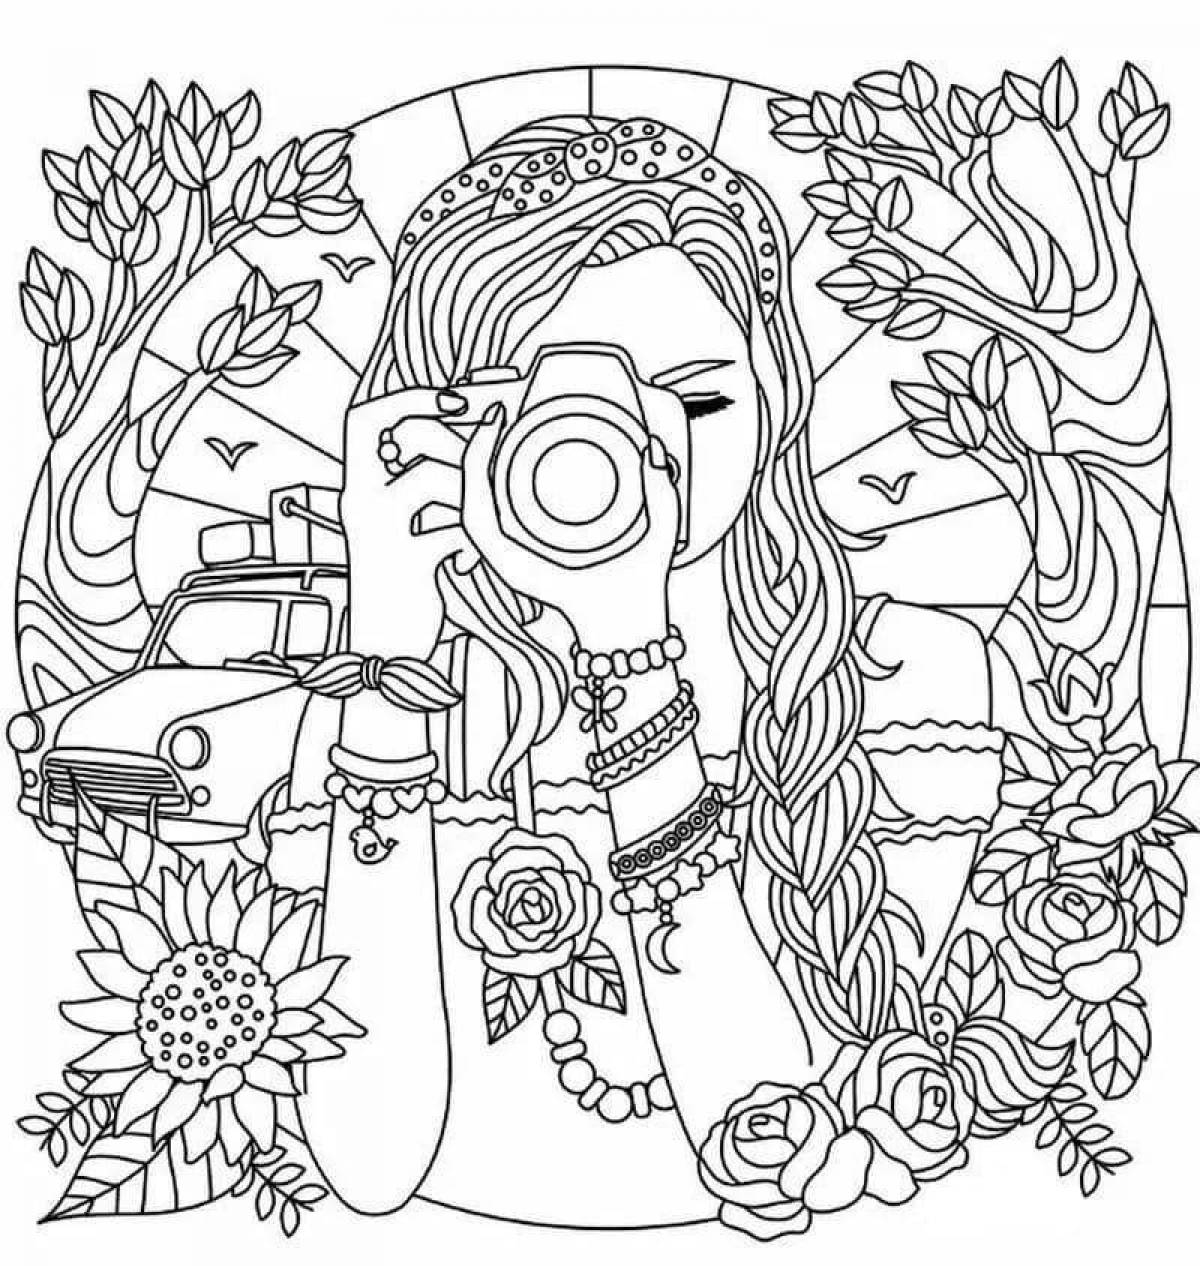 Creative coloring book for girls 10-12 years old